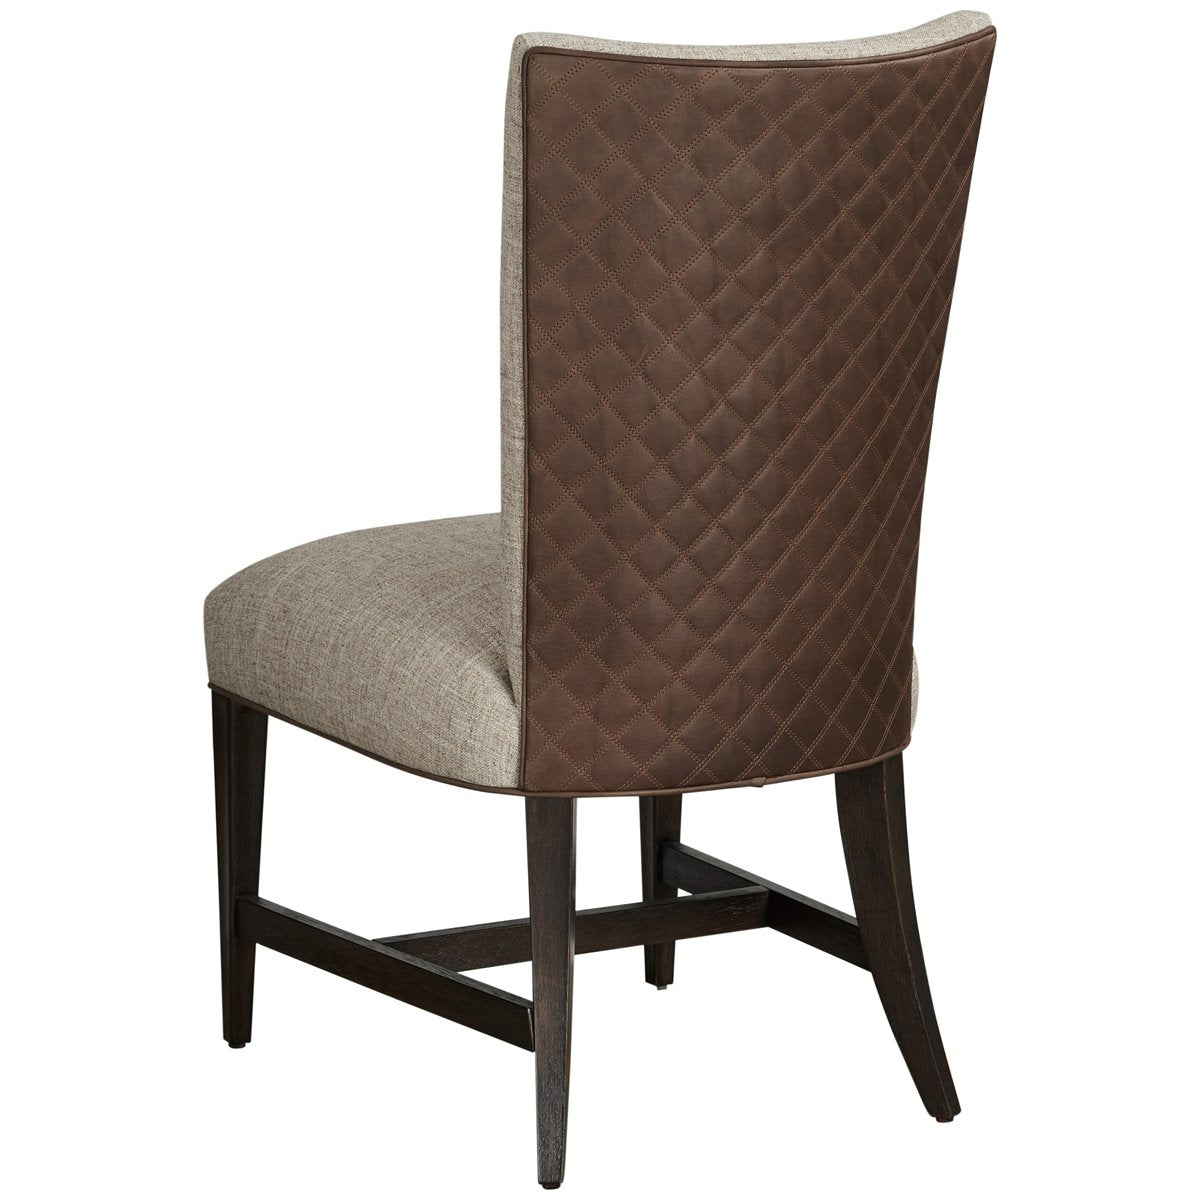 A.R.T. Furniture Woodwright Racine Upholstered Side Chair, Set of 2